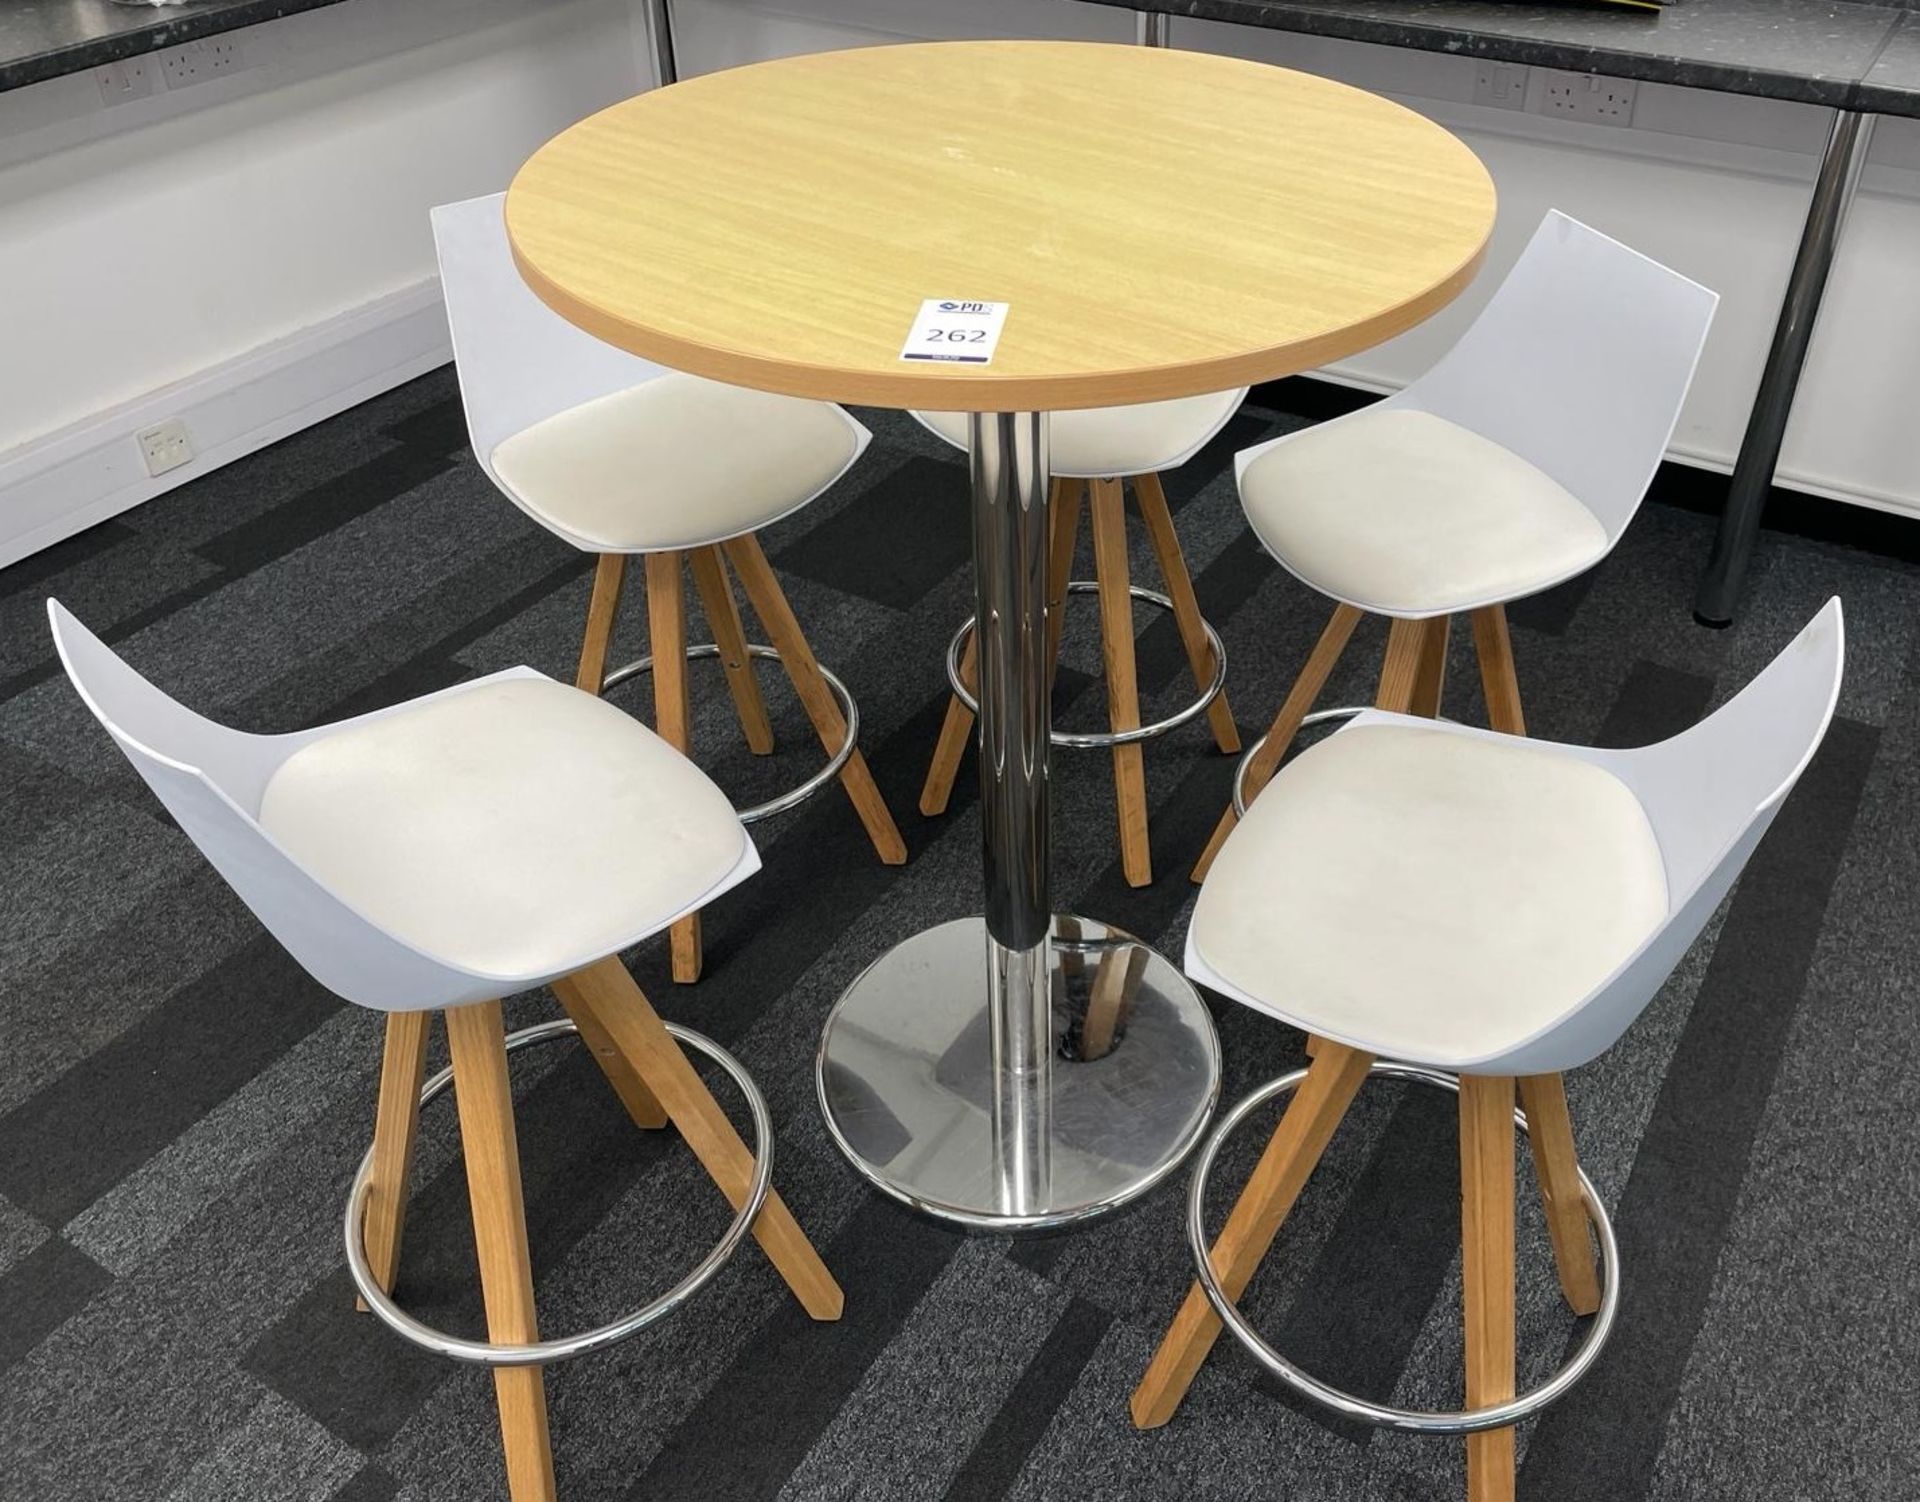 Light Oak Effect Poser Table & 5 Bar Stools (Located Rugby. Please Refer to General Notes)